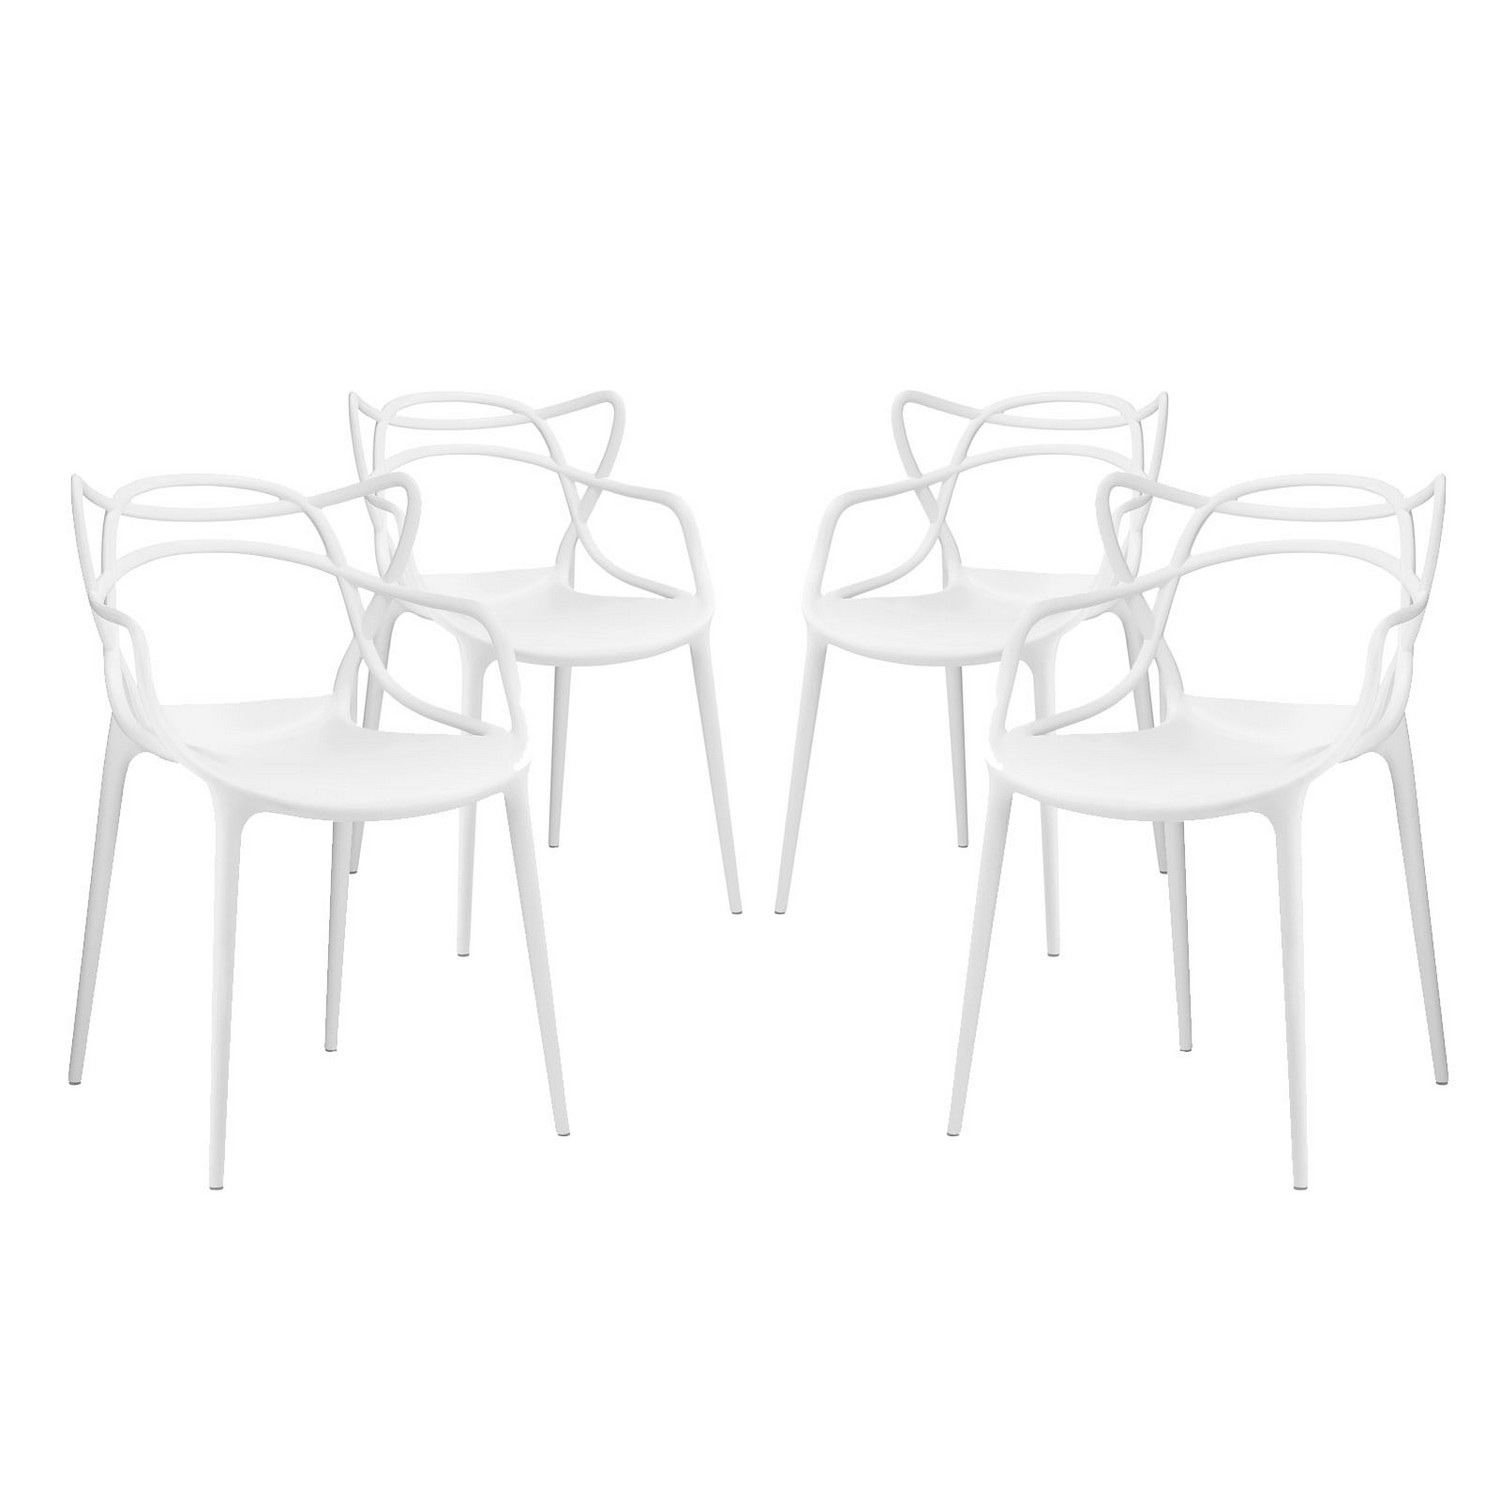 Modway Entangled Dining Chair - Set of 4 - White